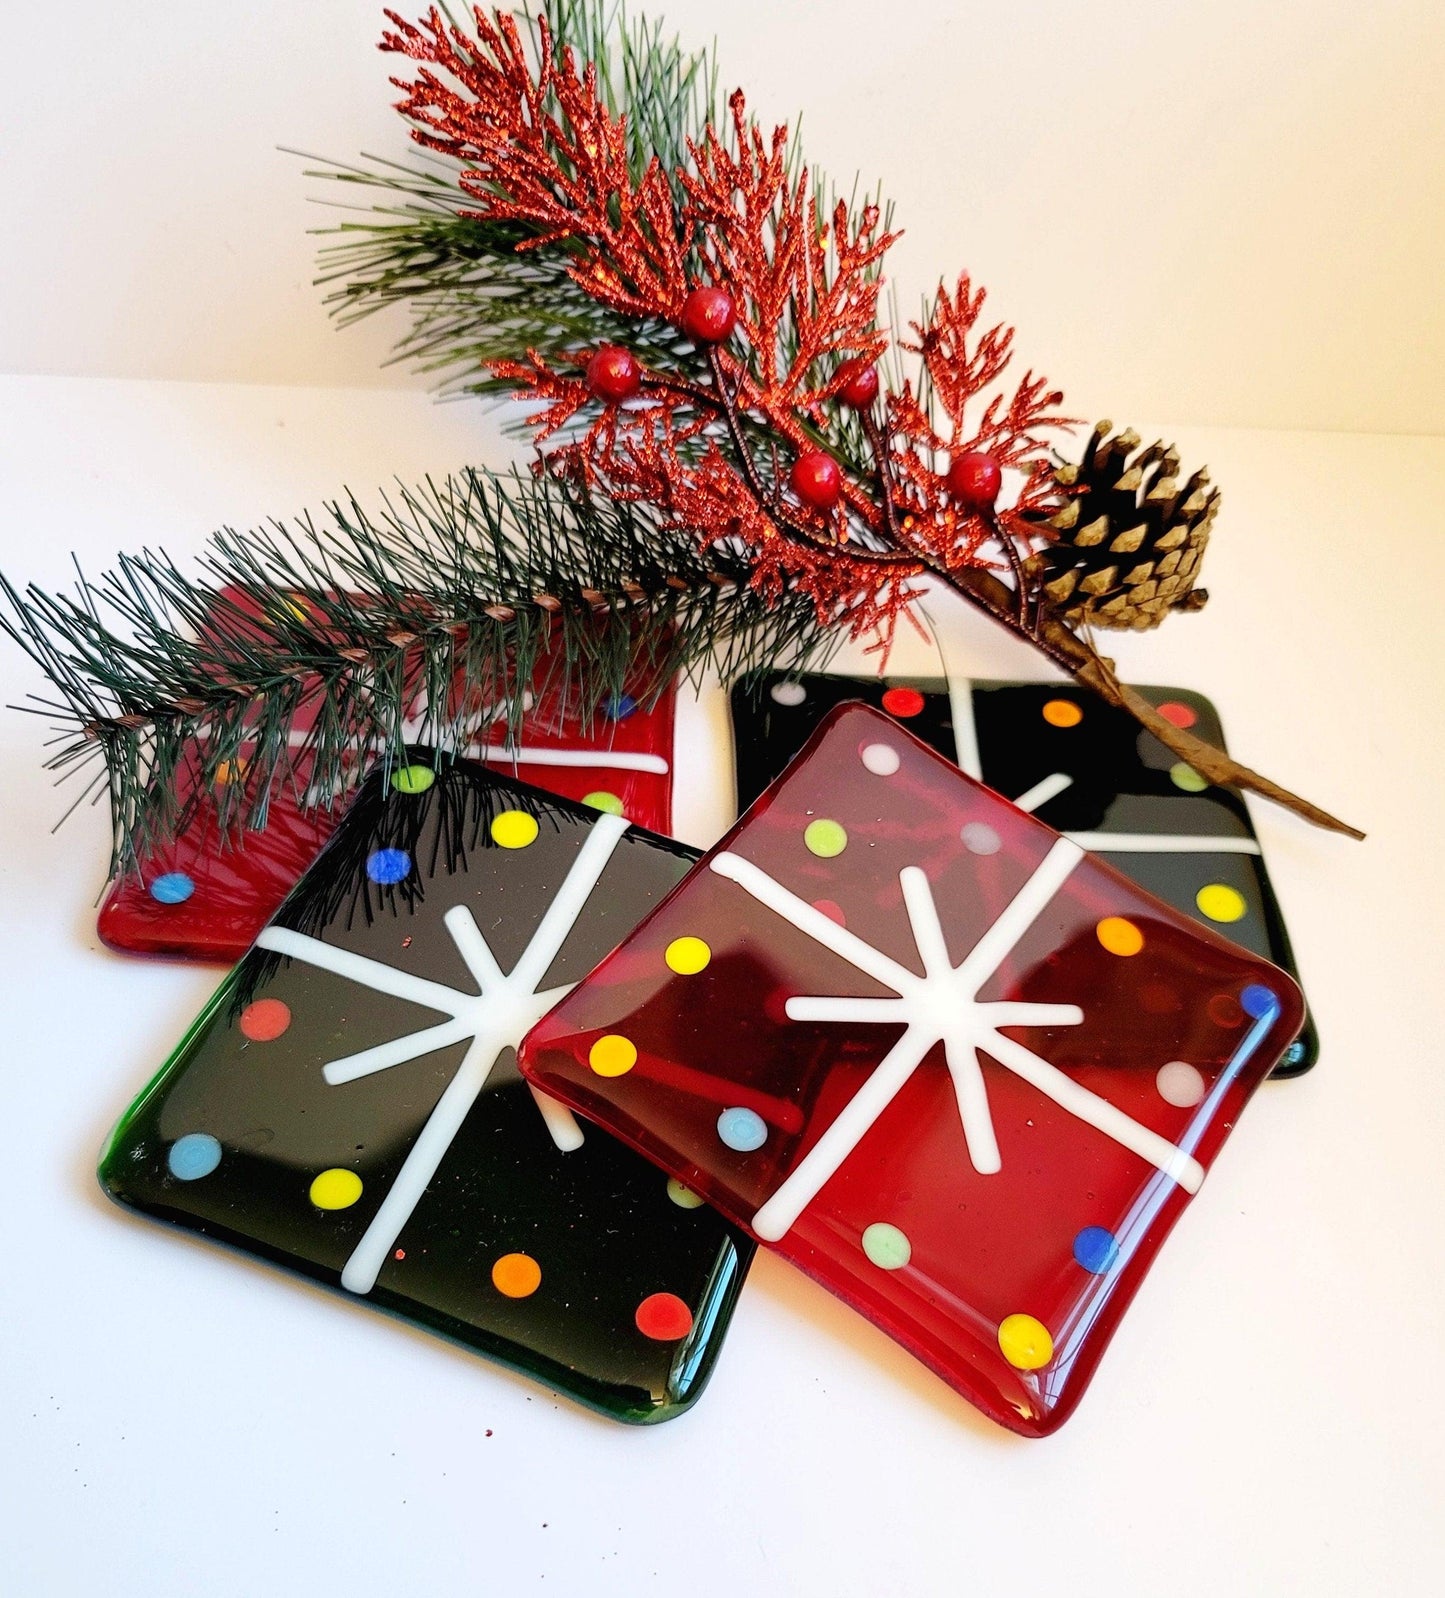 Whimsical Christmas Present Clear Fused Glasss Coasters (set of 4)